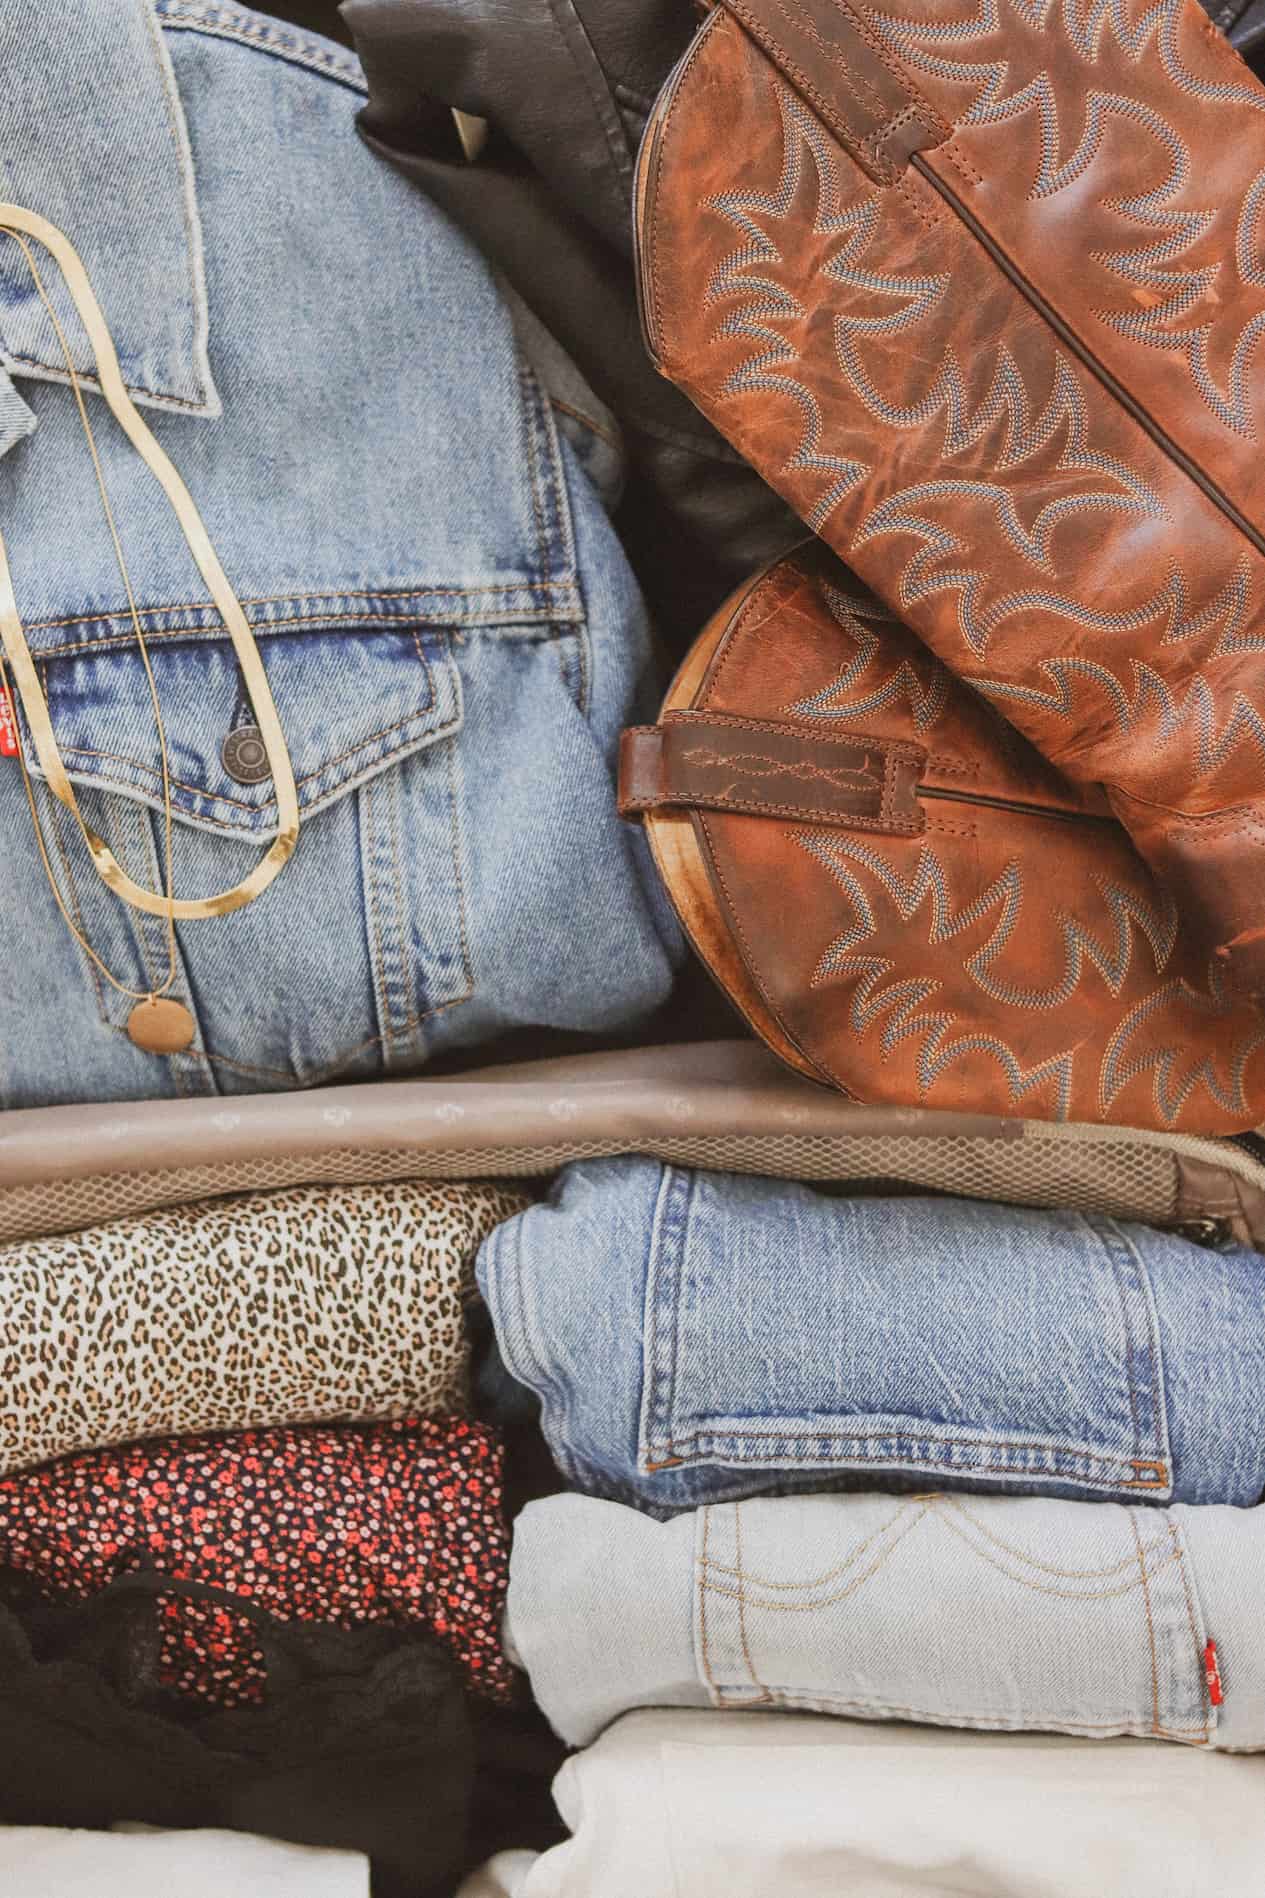 Close up image of a suitcase filled with clothes to wear on a trip to Nashville.